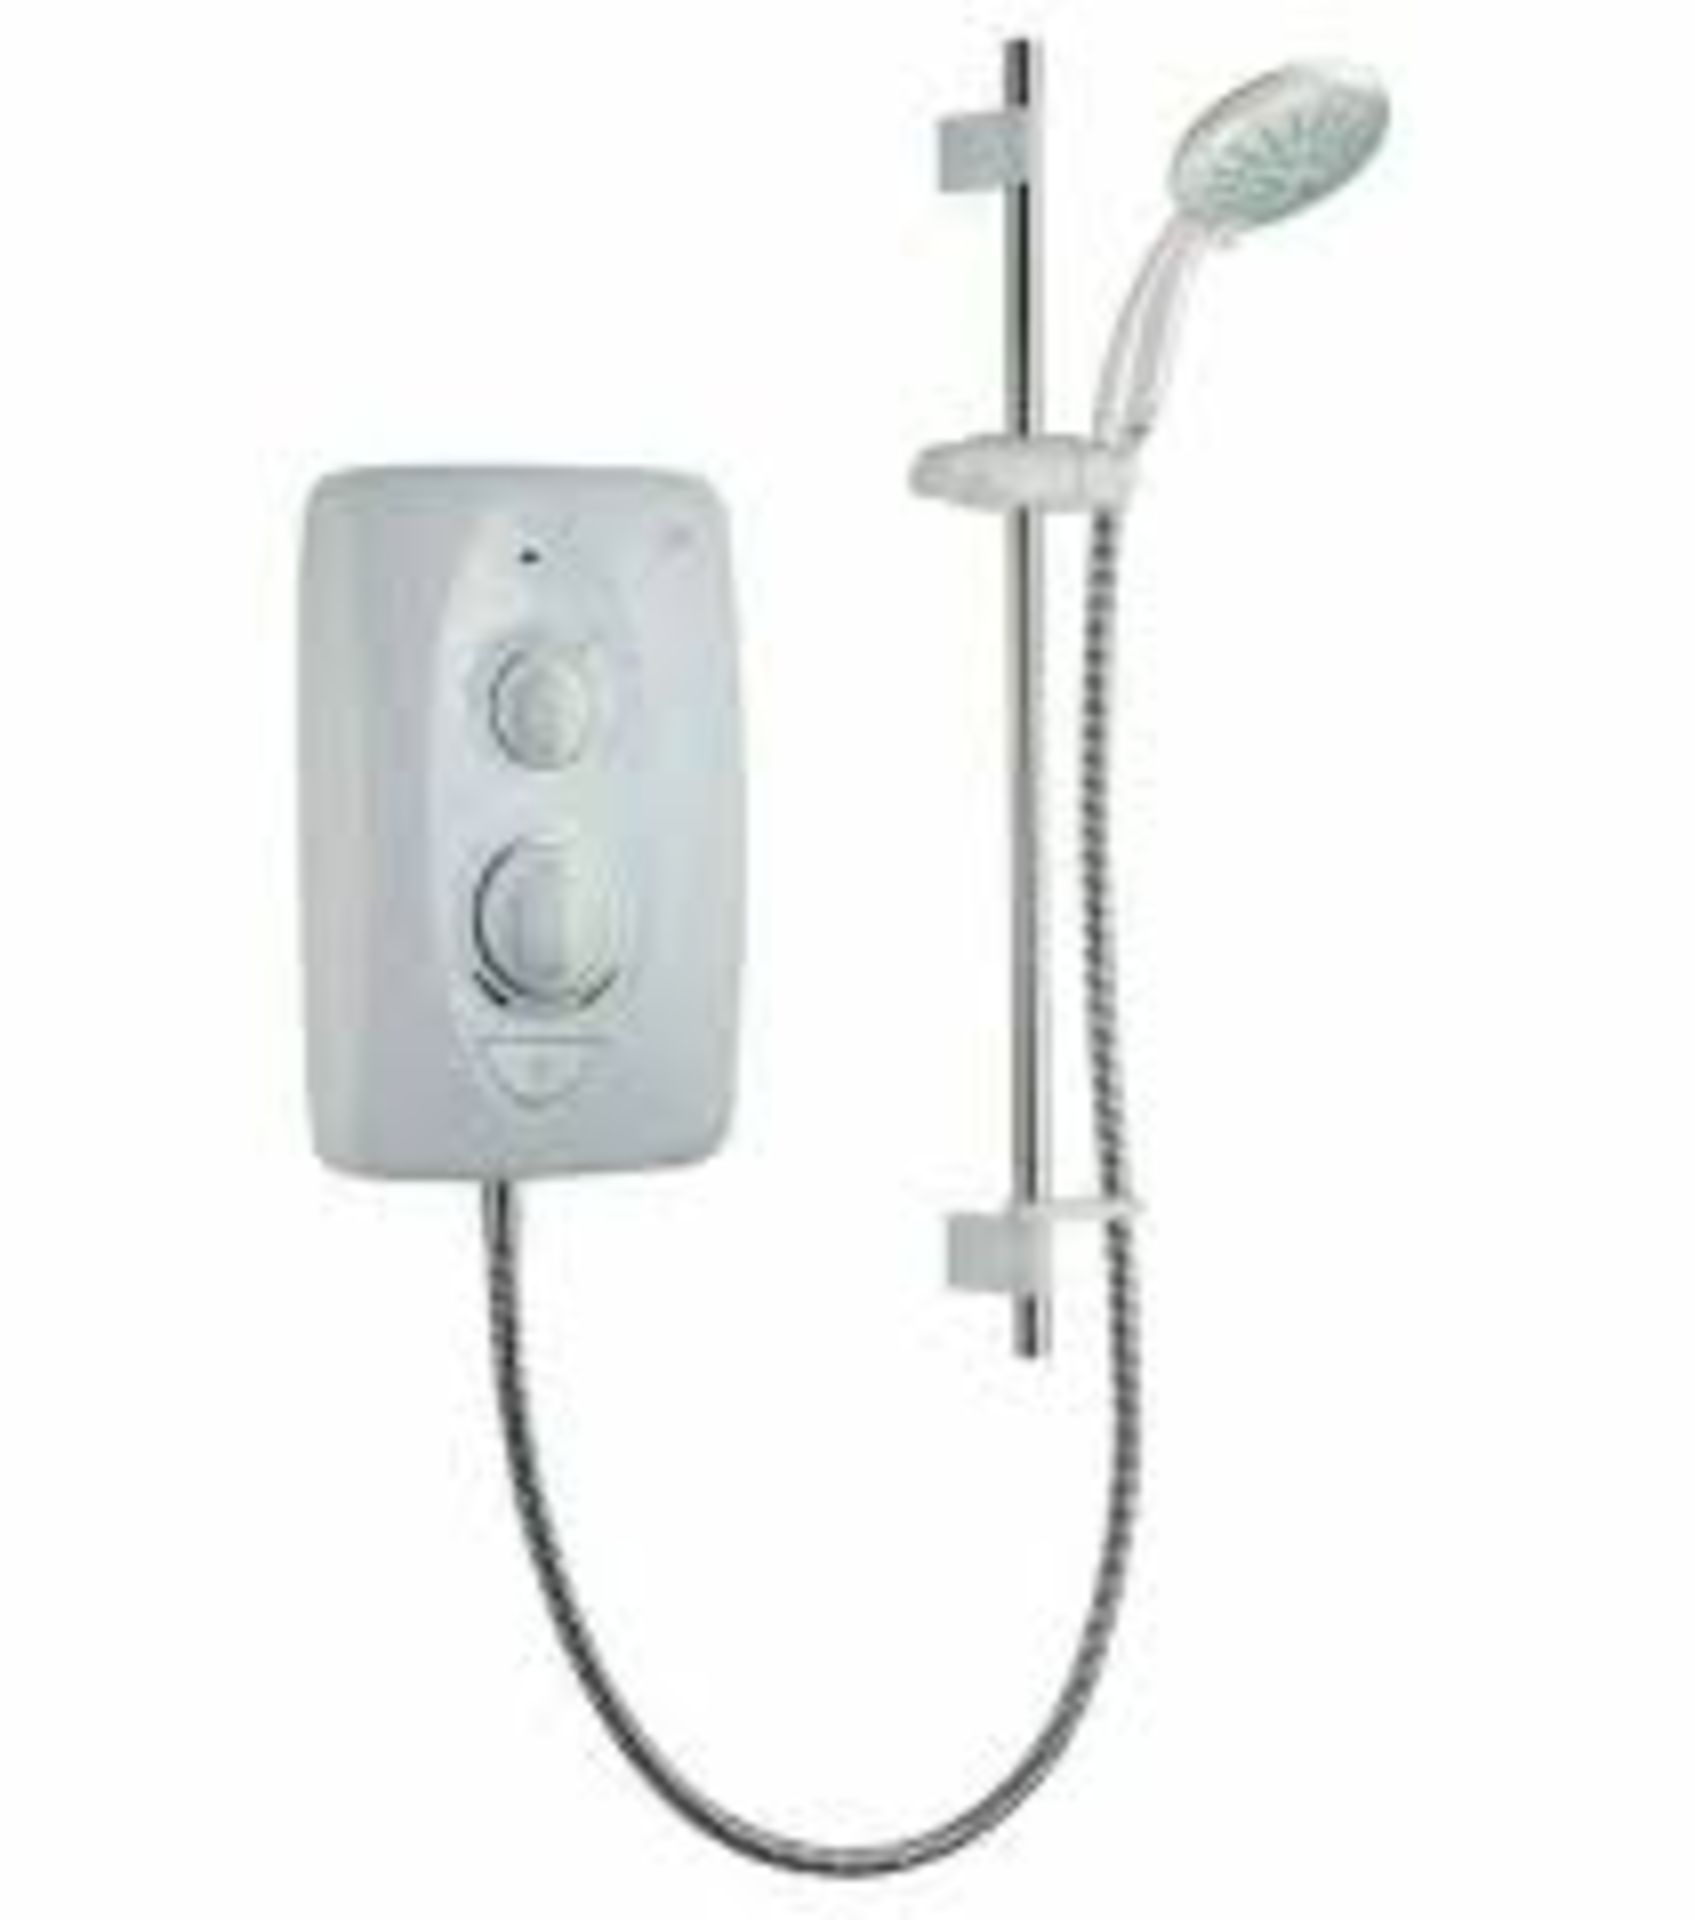 Mira Sprint Electric Shower 8.5kW Max Power Unit Powerful White Multi-Fit UK - ER51.